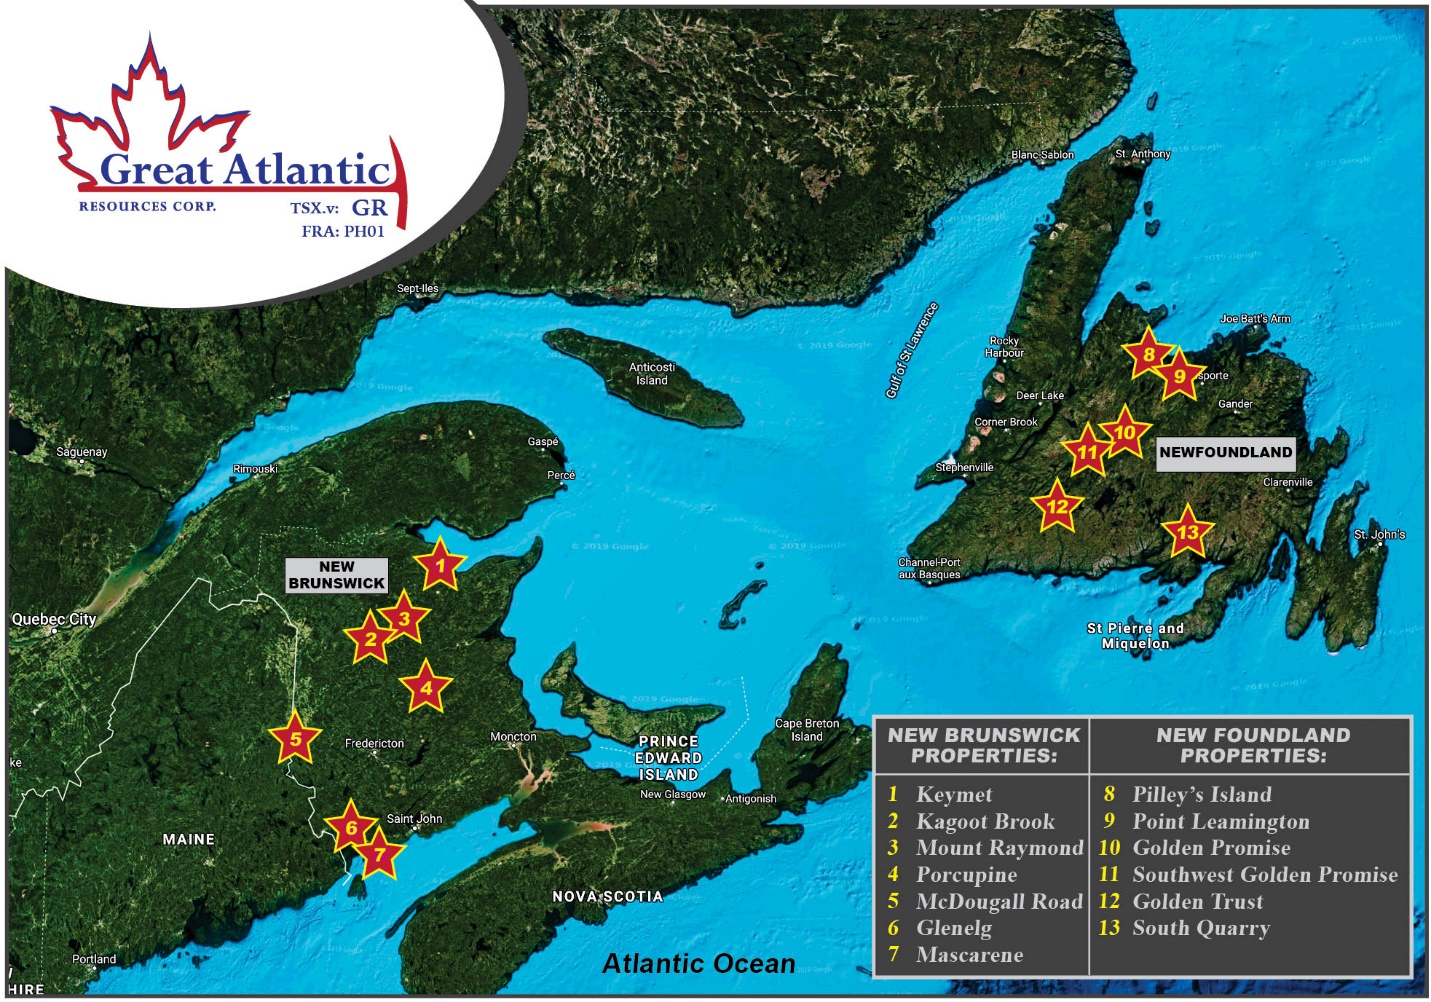 Great Atlantic Resources Corp., Tuesday, November 24, 2020, Press release picture